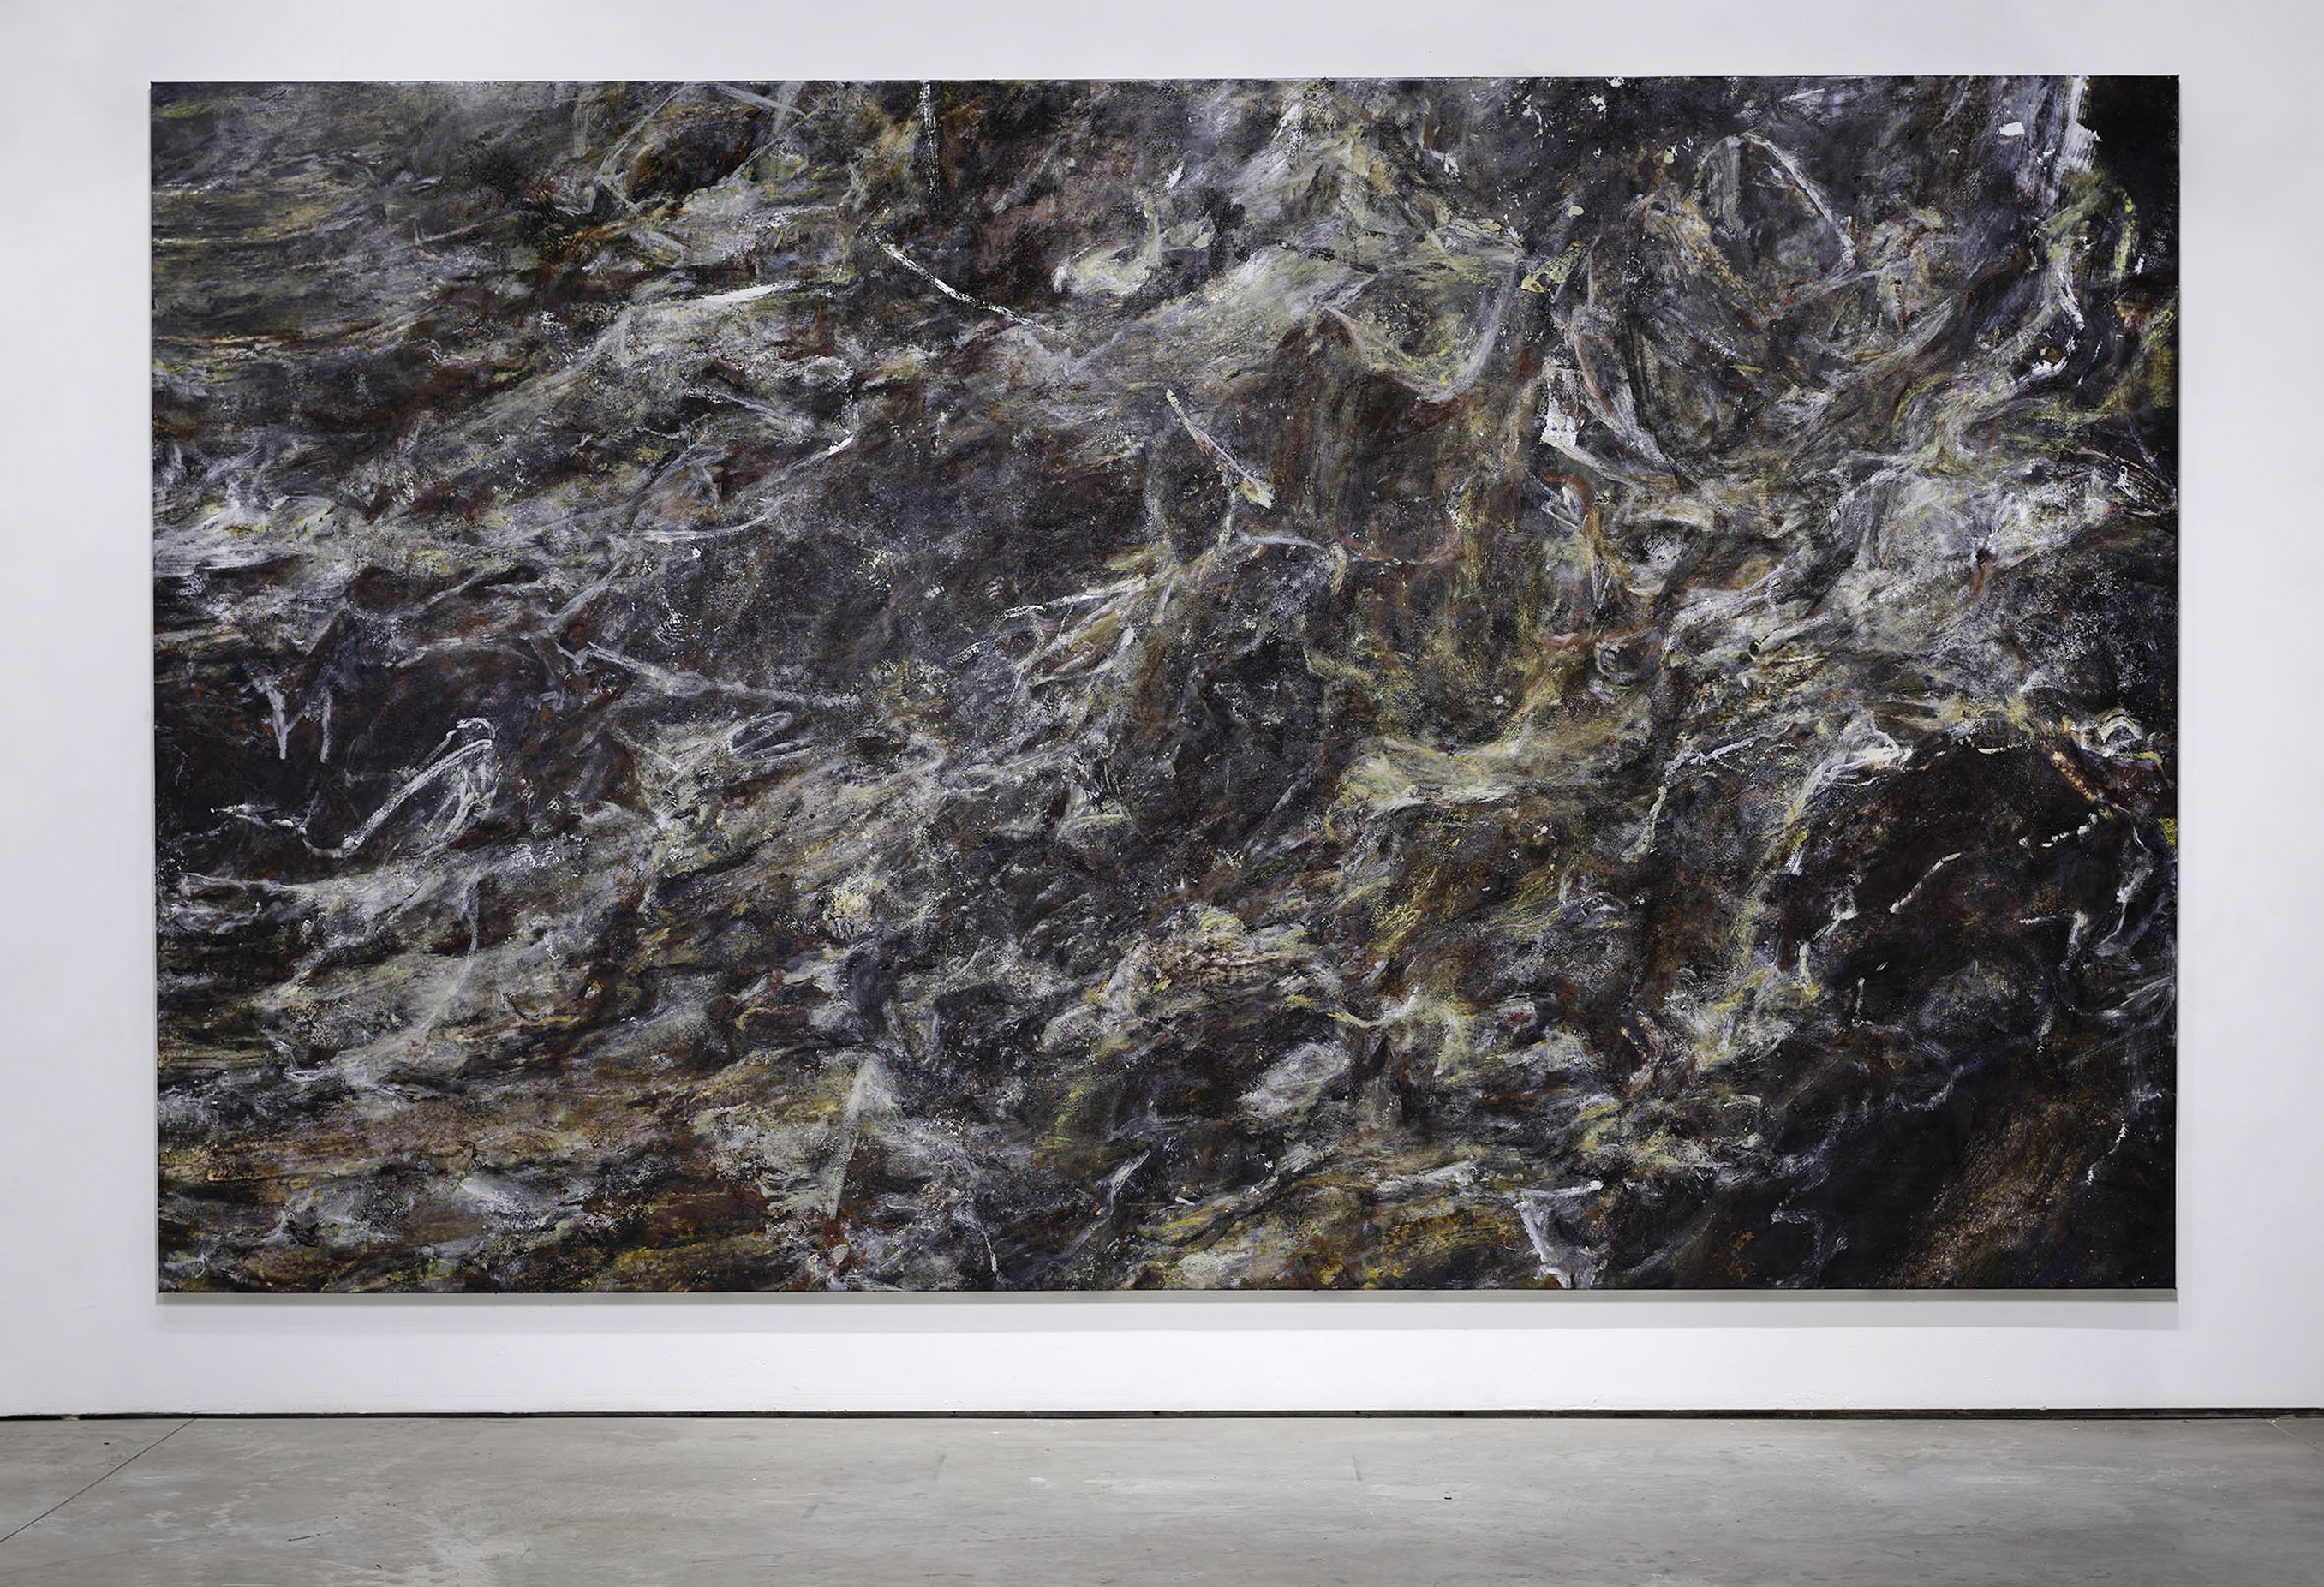 SARDANAPALUS (MAGNASCO), 2020, acrylic and water-based urethane dispersion - including metallic pigments, glass beads, mineral crystals and shredded tire rubber on stretched photographic vinyl billboard print, 12 x 20 feet